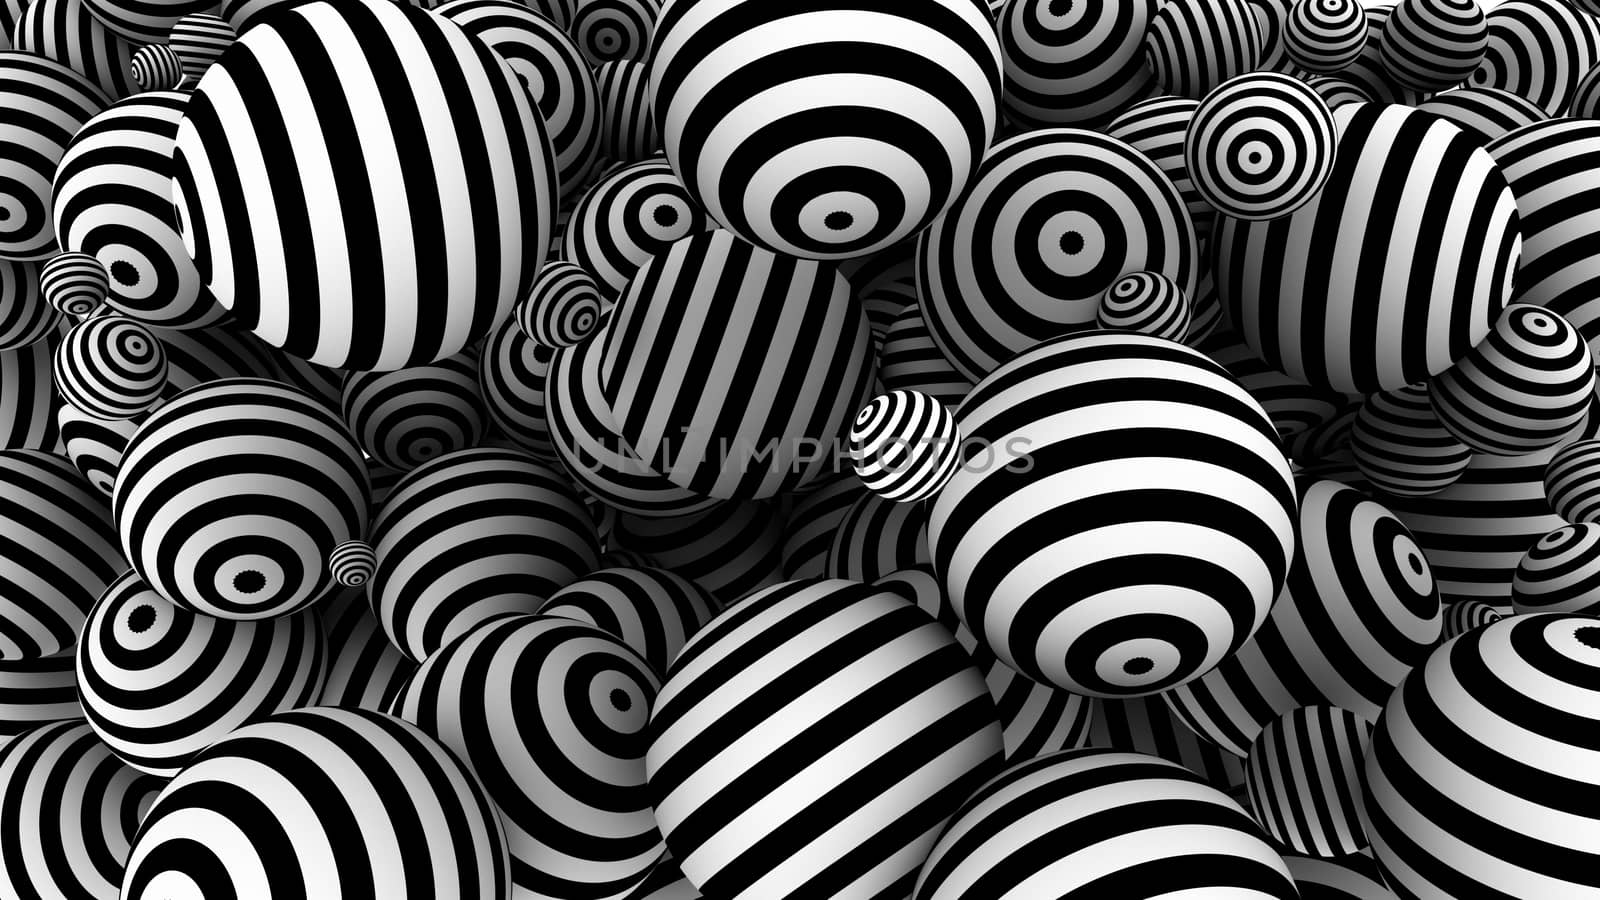 Opt art 3d rendering of many black and white spheres creating a hypnotic effect. They shape some circling illusion and look cheerful and beautiful.